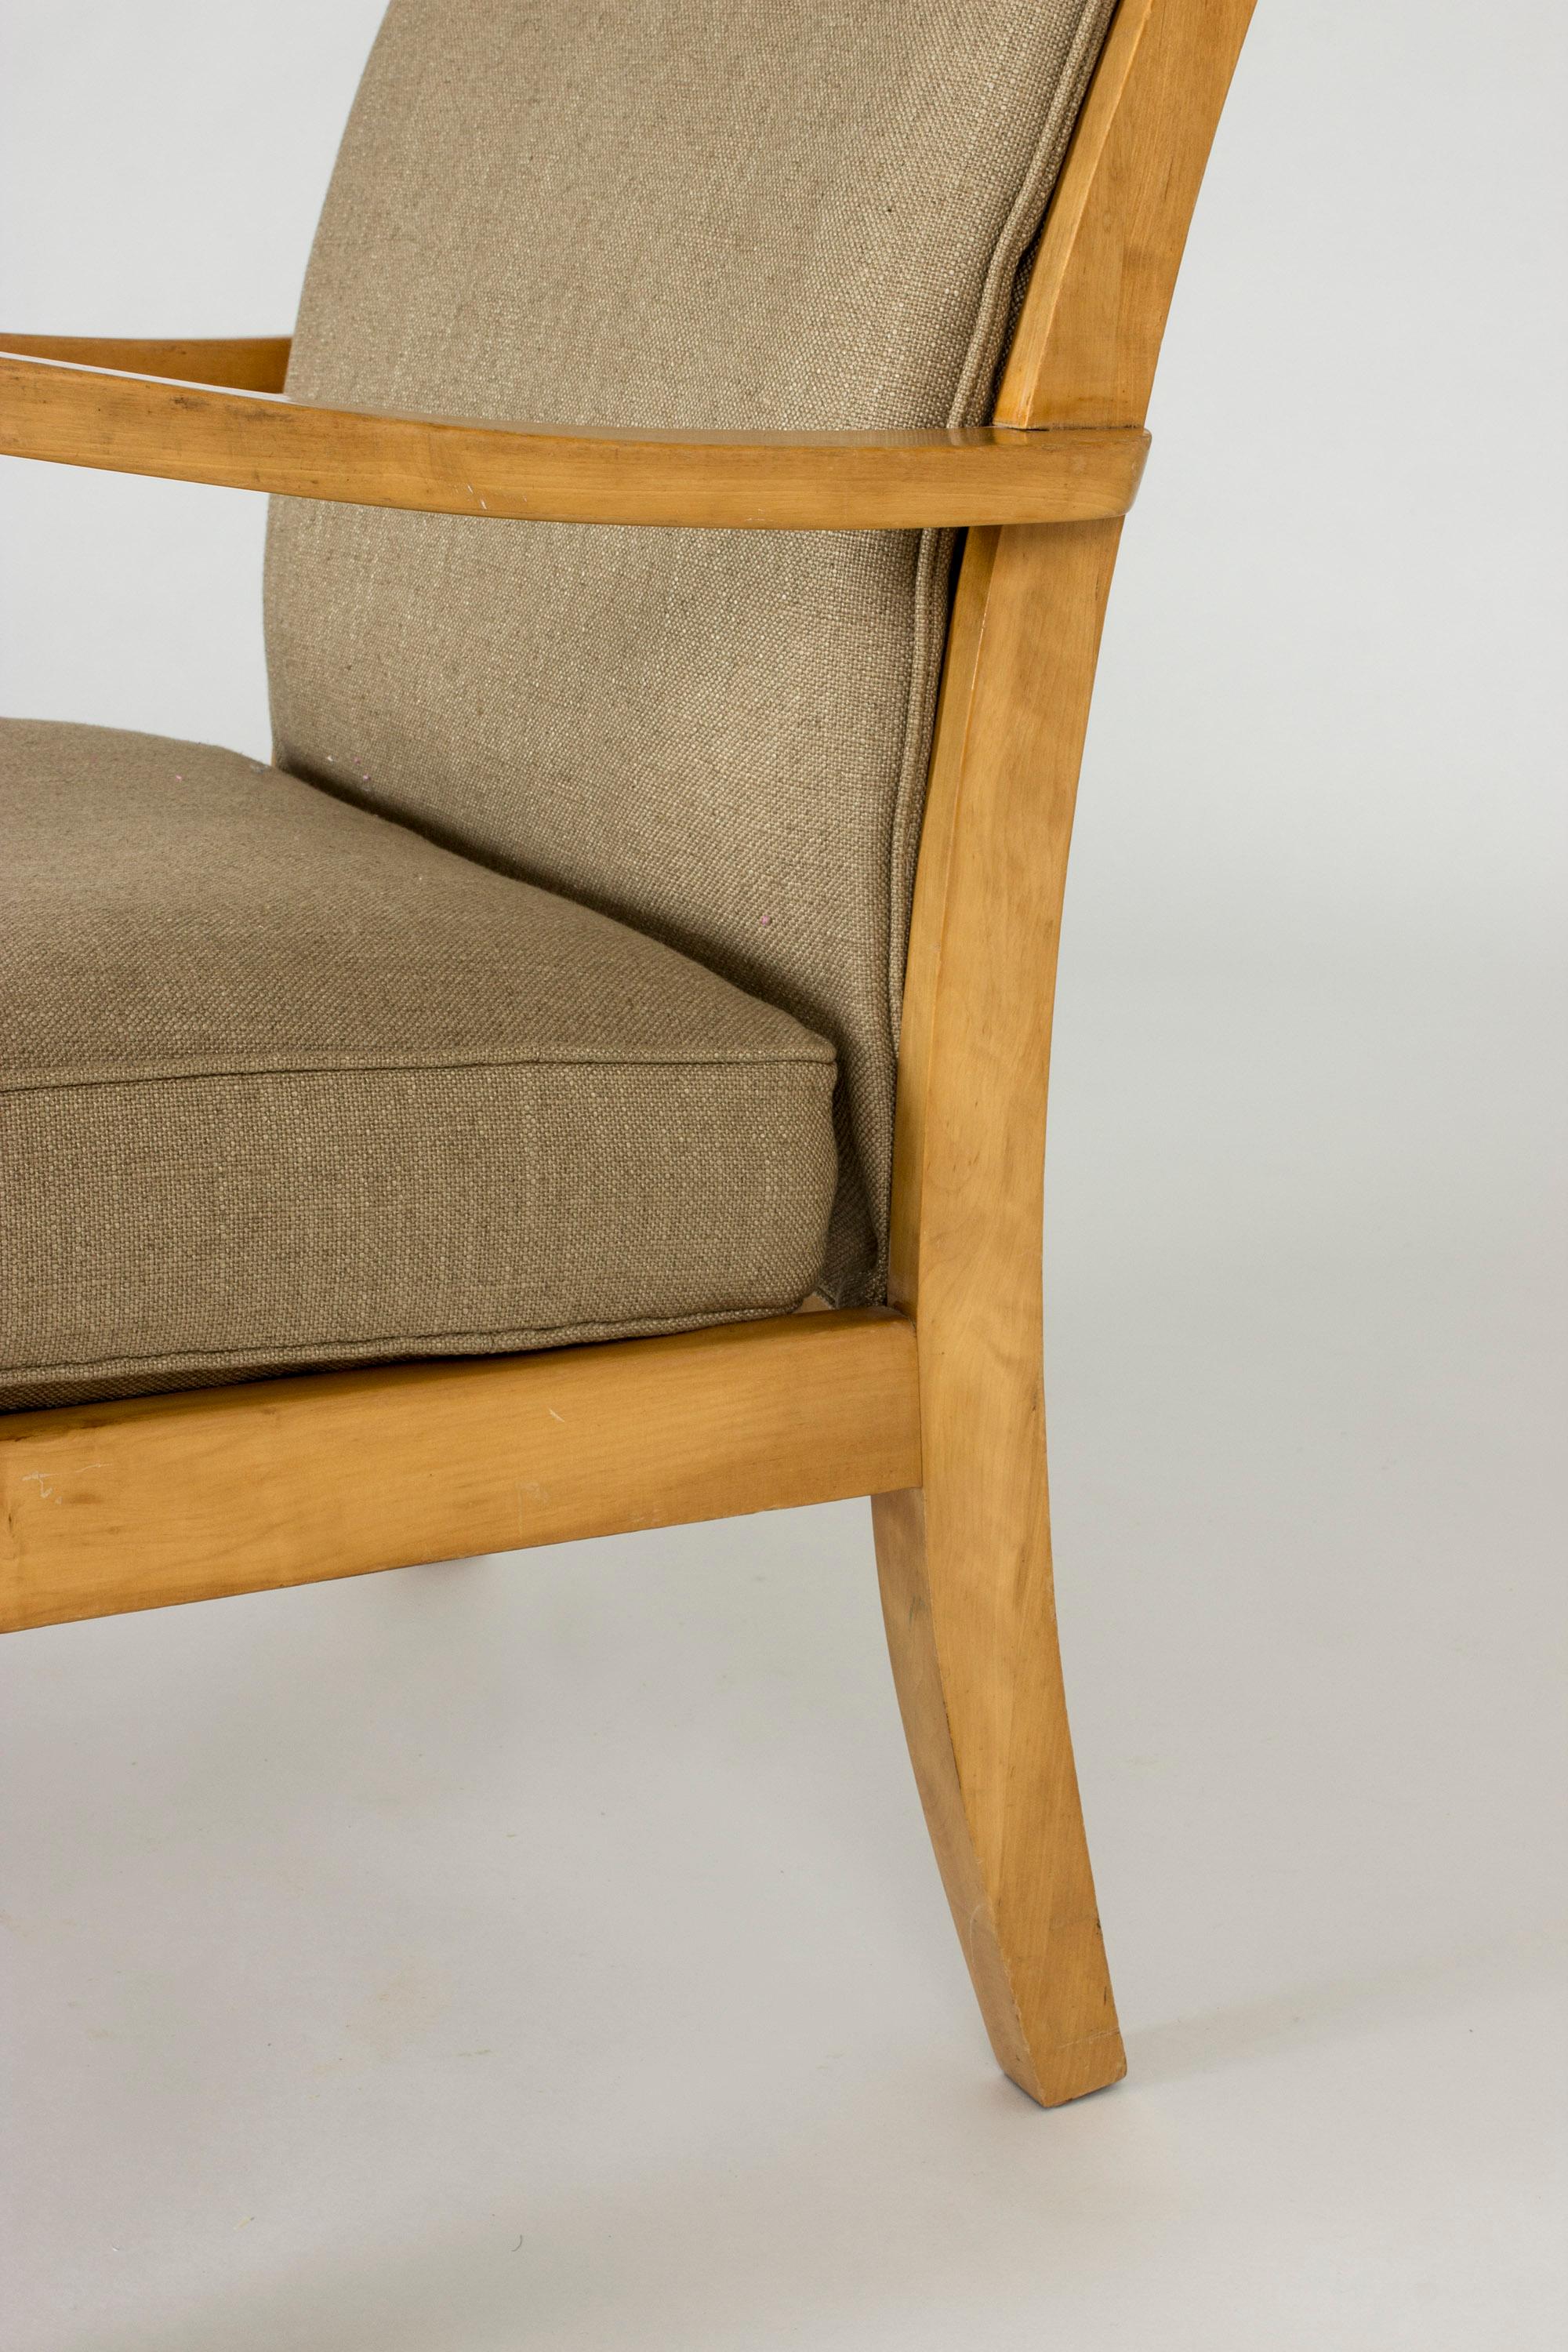 Pair of Functionalist Birch and Linen Lounge Chairs by Axel Larsson for Bodafors For Sale 4